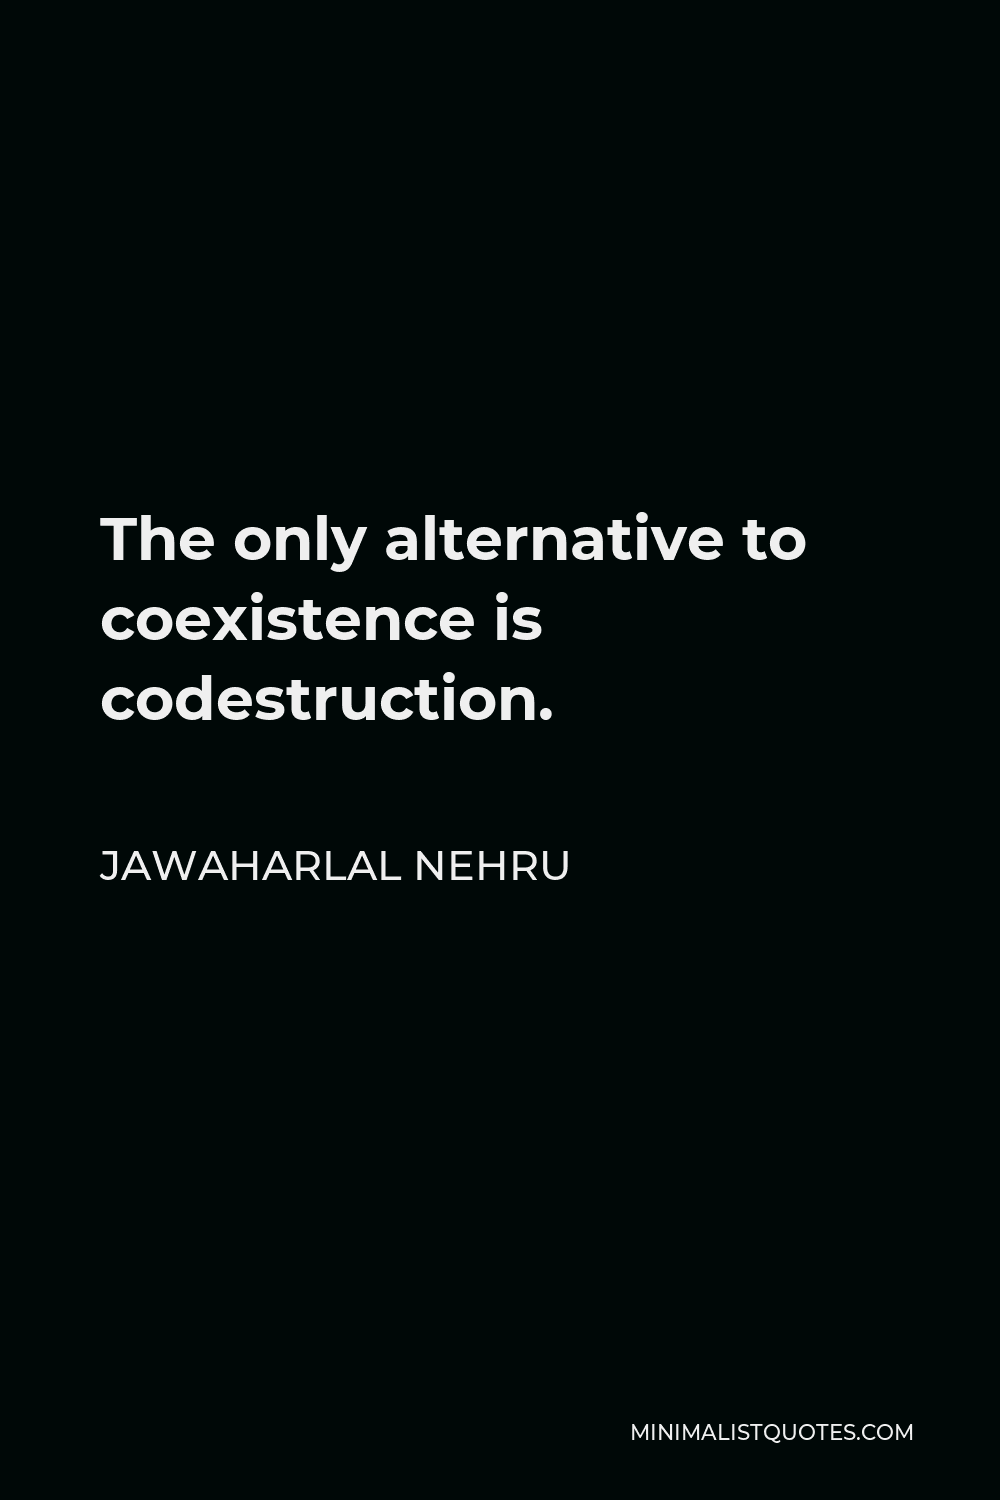 Jawaharlal Nehru Quote - The only alternative to coexistence is codestruction.